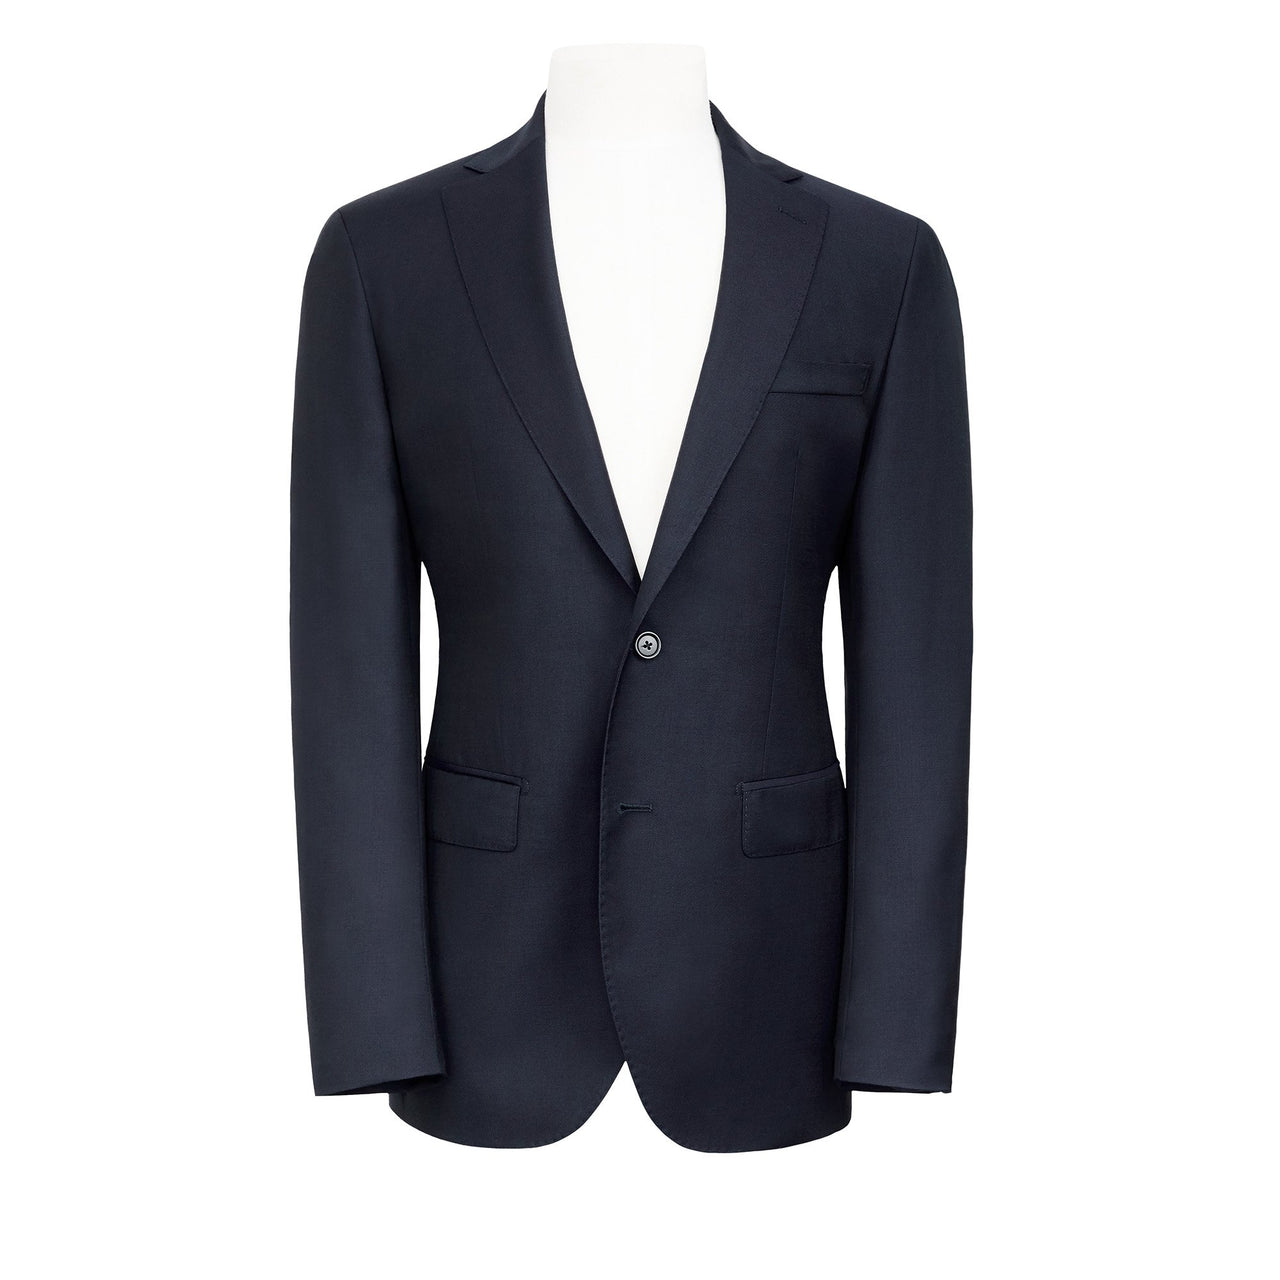 HENRY TWILL SUIT  CHARCOAL SH